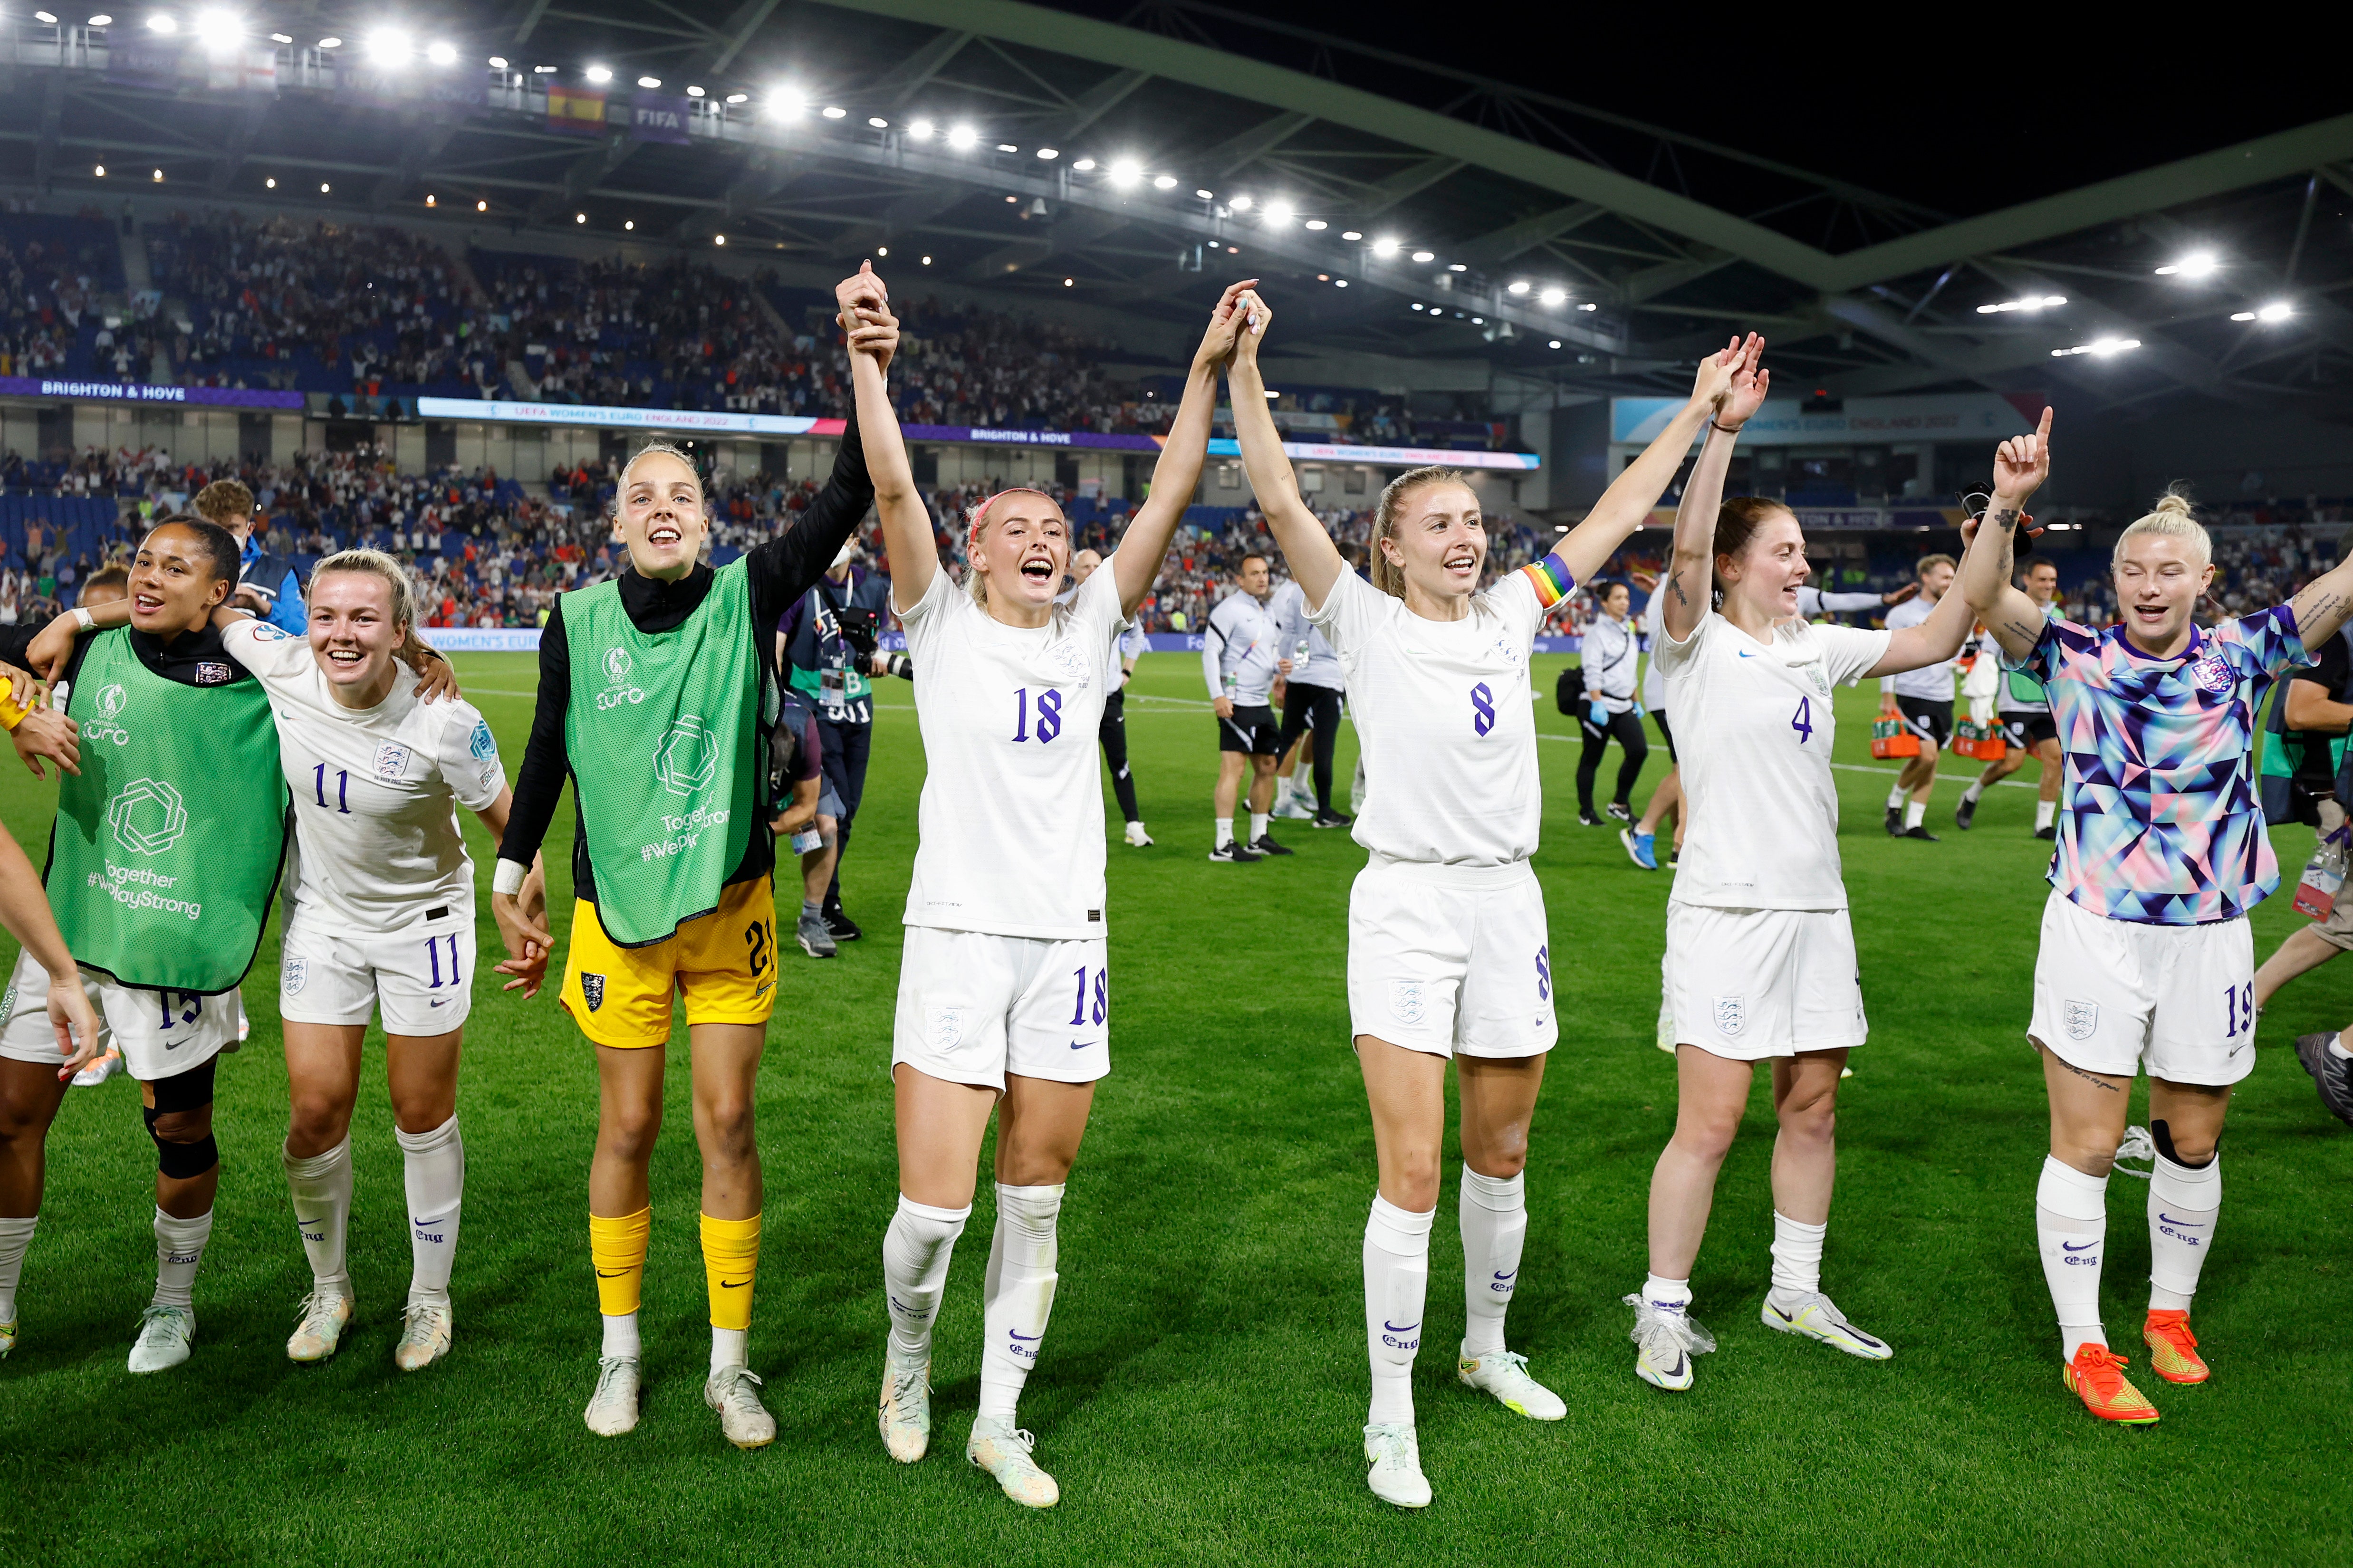 Women's Euro 2022: how England has hosted the biggest Women's Euros ever